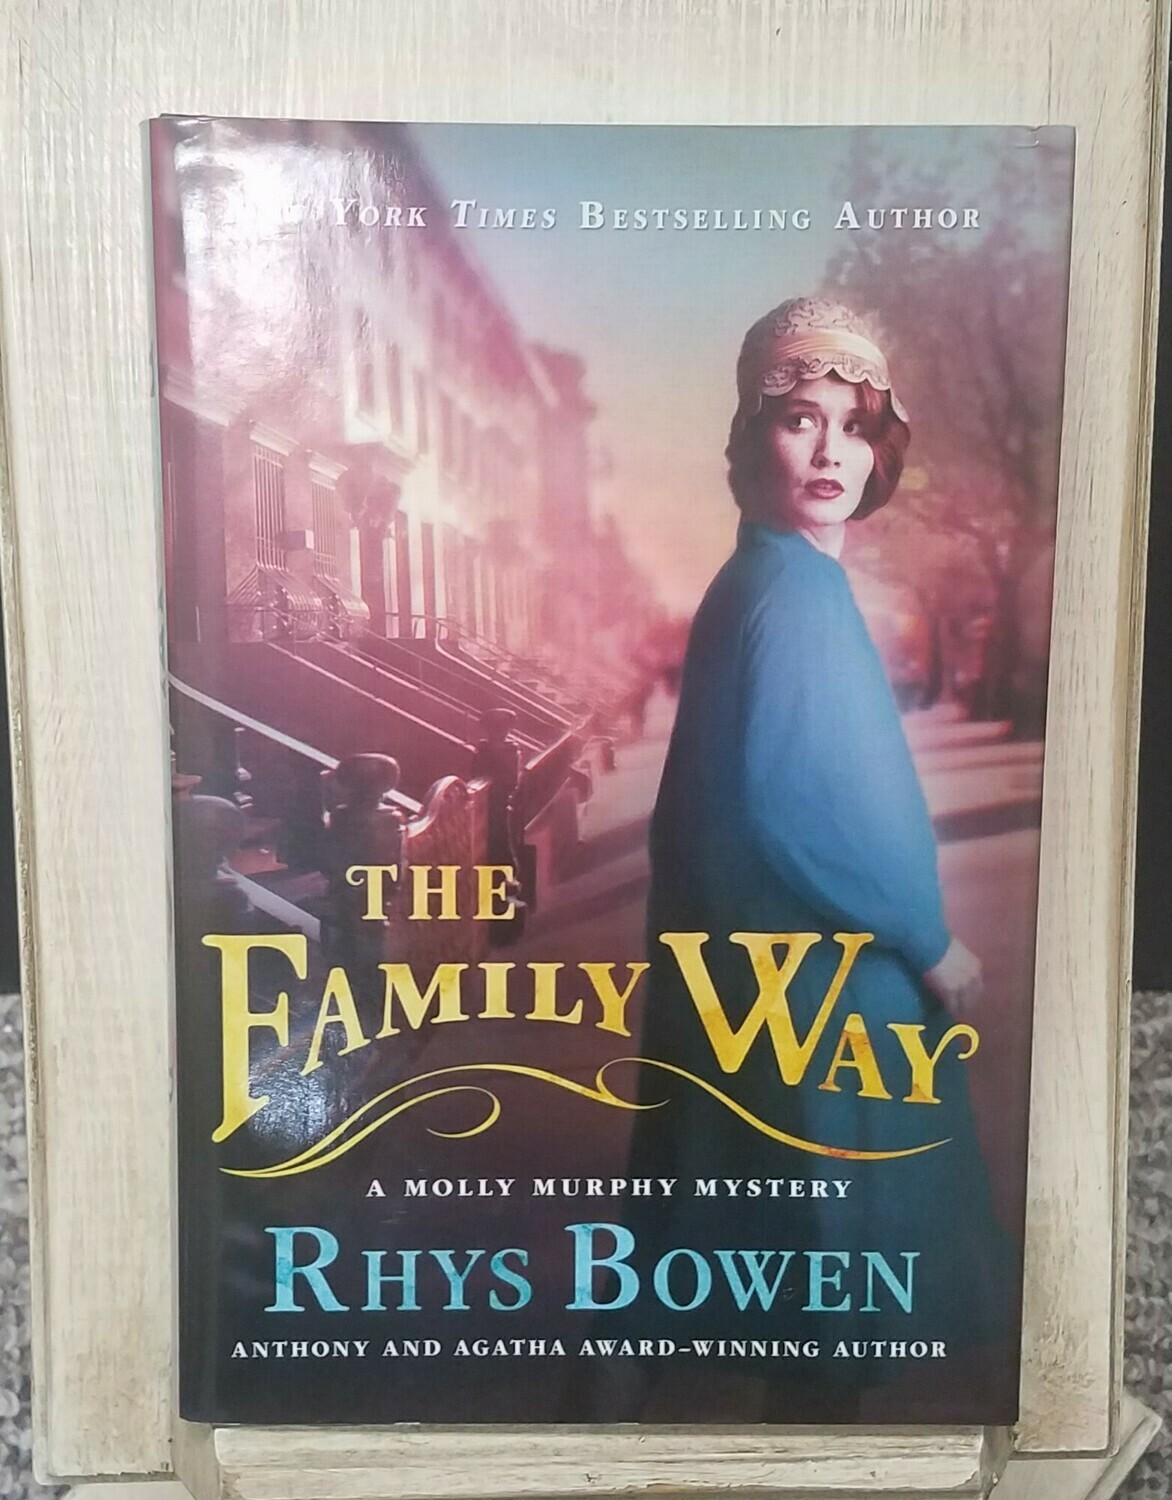 The Family Way by Rhys Bowen